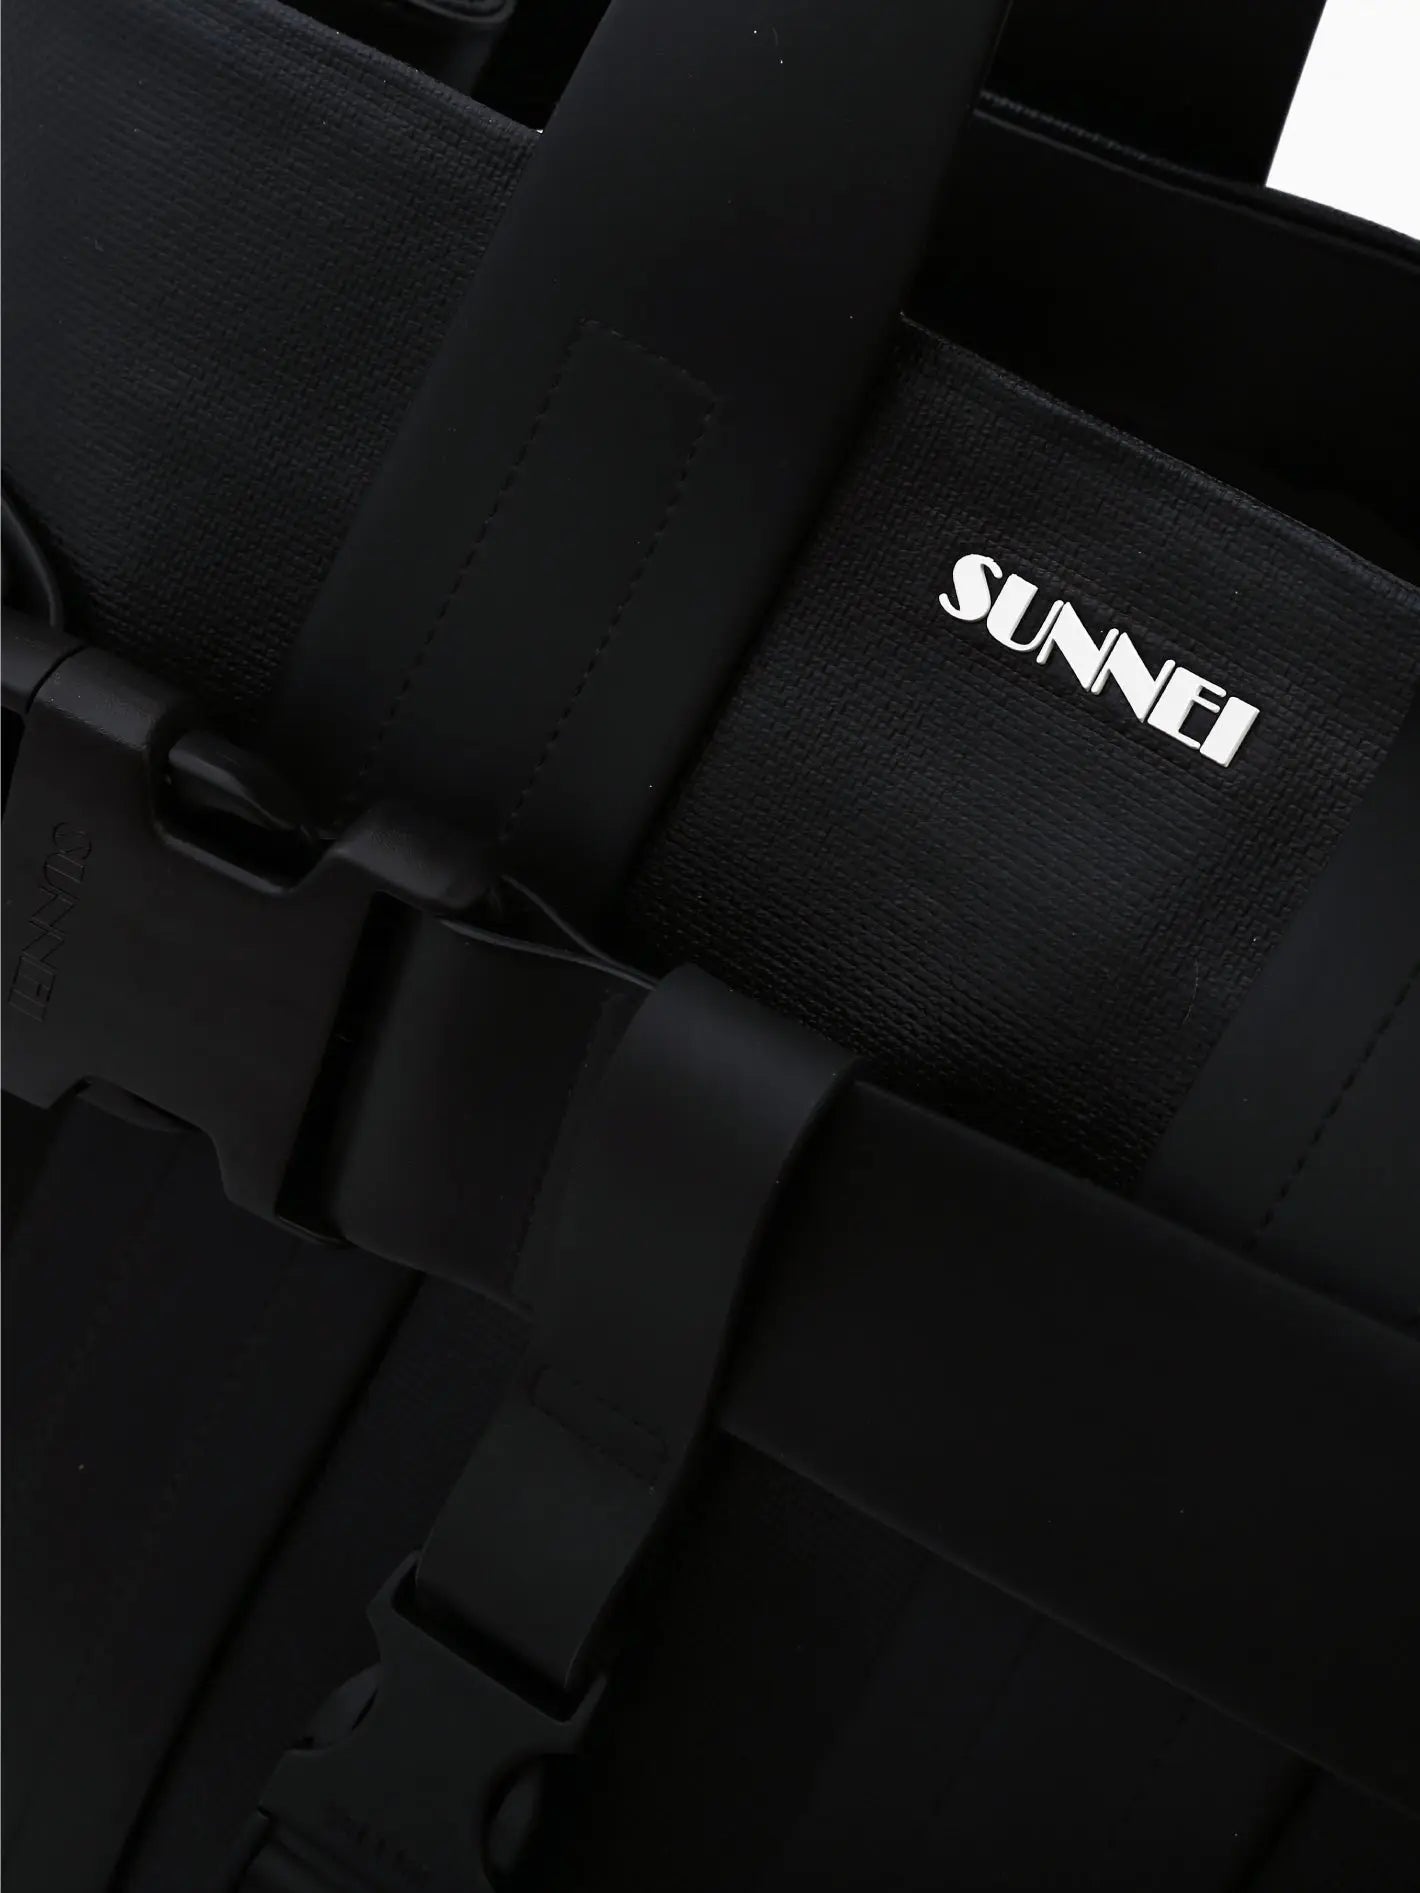 A sleek black Parallelepipedo Messenger Bag Black with wide handles and a decorative strap featuring a buckle across the front. The bag has a modern design with a subtle label displaying the brand name "Sunnei". Available exclusively at BassalStore in Barcelona, the plain white background emphasizes its minimalist aesthetic.